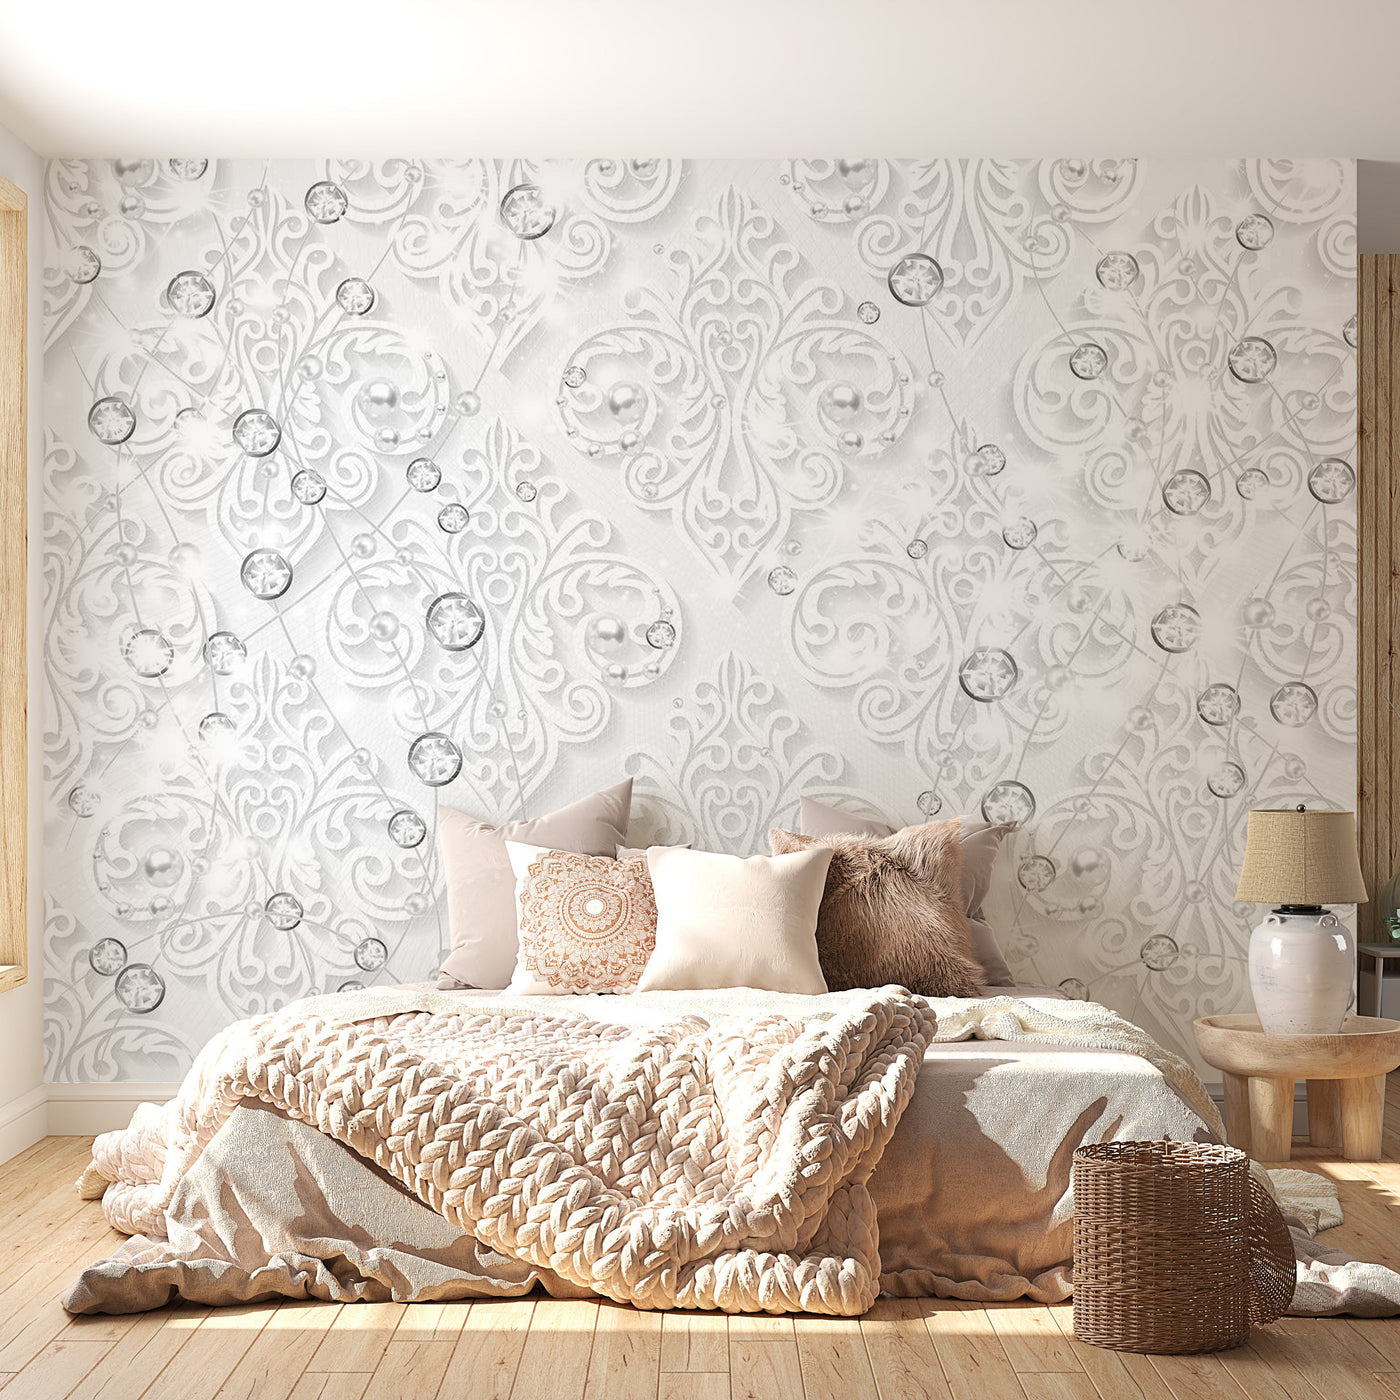 Peel & Stick Glam Wall Mural - Ornaments With Diamonds - Removable Wall Decals